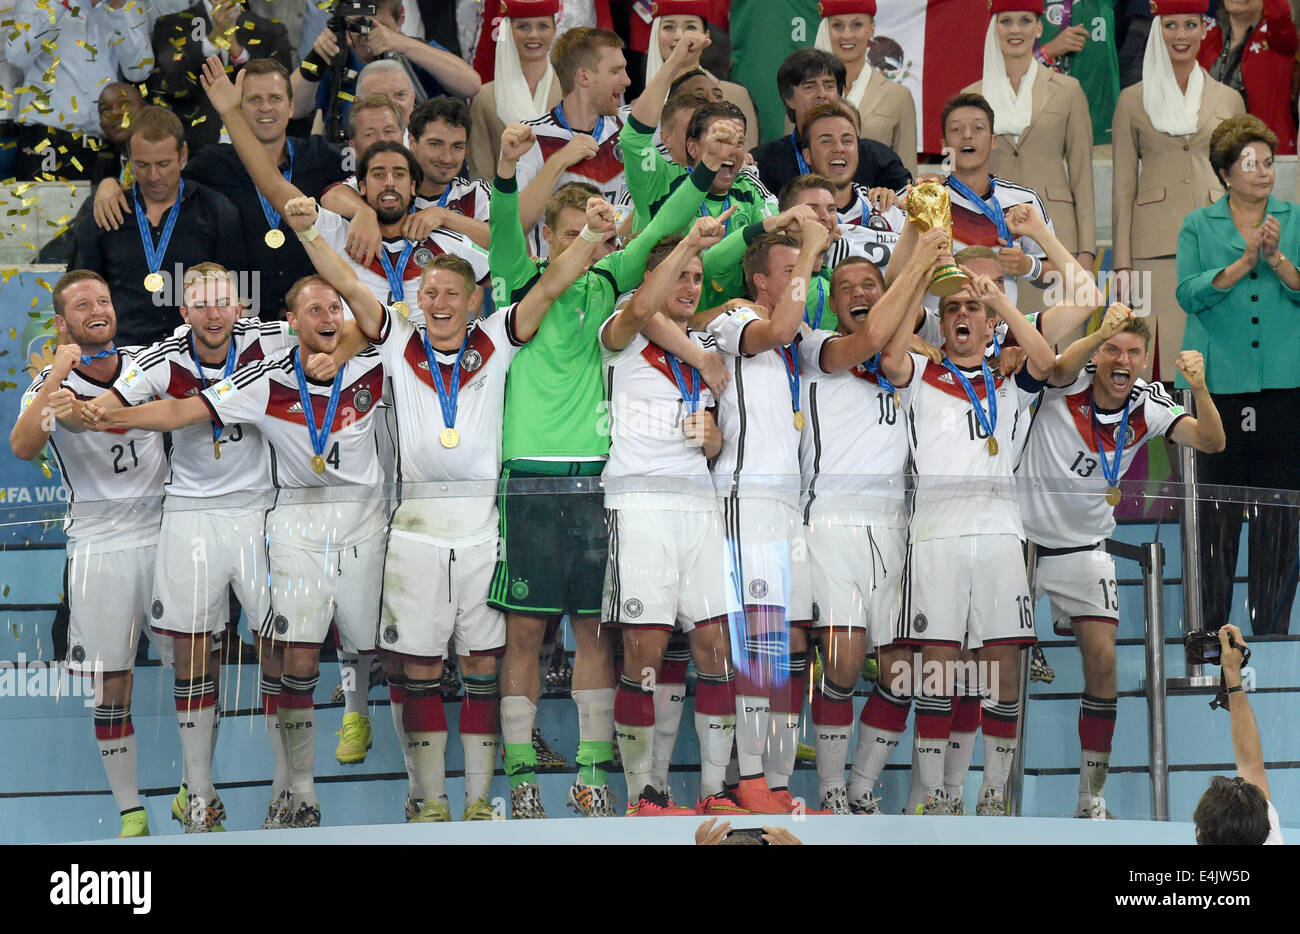 Rio de Janeiro, Brazil. 13th July, 2014. Philipp Lahm (2-R) of Germany lifts up the World Cup trophy between his teammates after winning the FIFA World Cup 2014 final soccer match between Germany and Argentina at the Estadio do Maracana in Rio de Janeiro, Brazil, 13 July 2014. Photo: Marcus Brandt/dpa/Alamy Live News Stock Photo